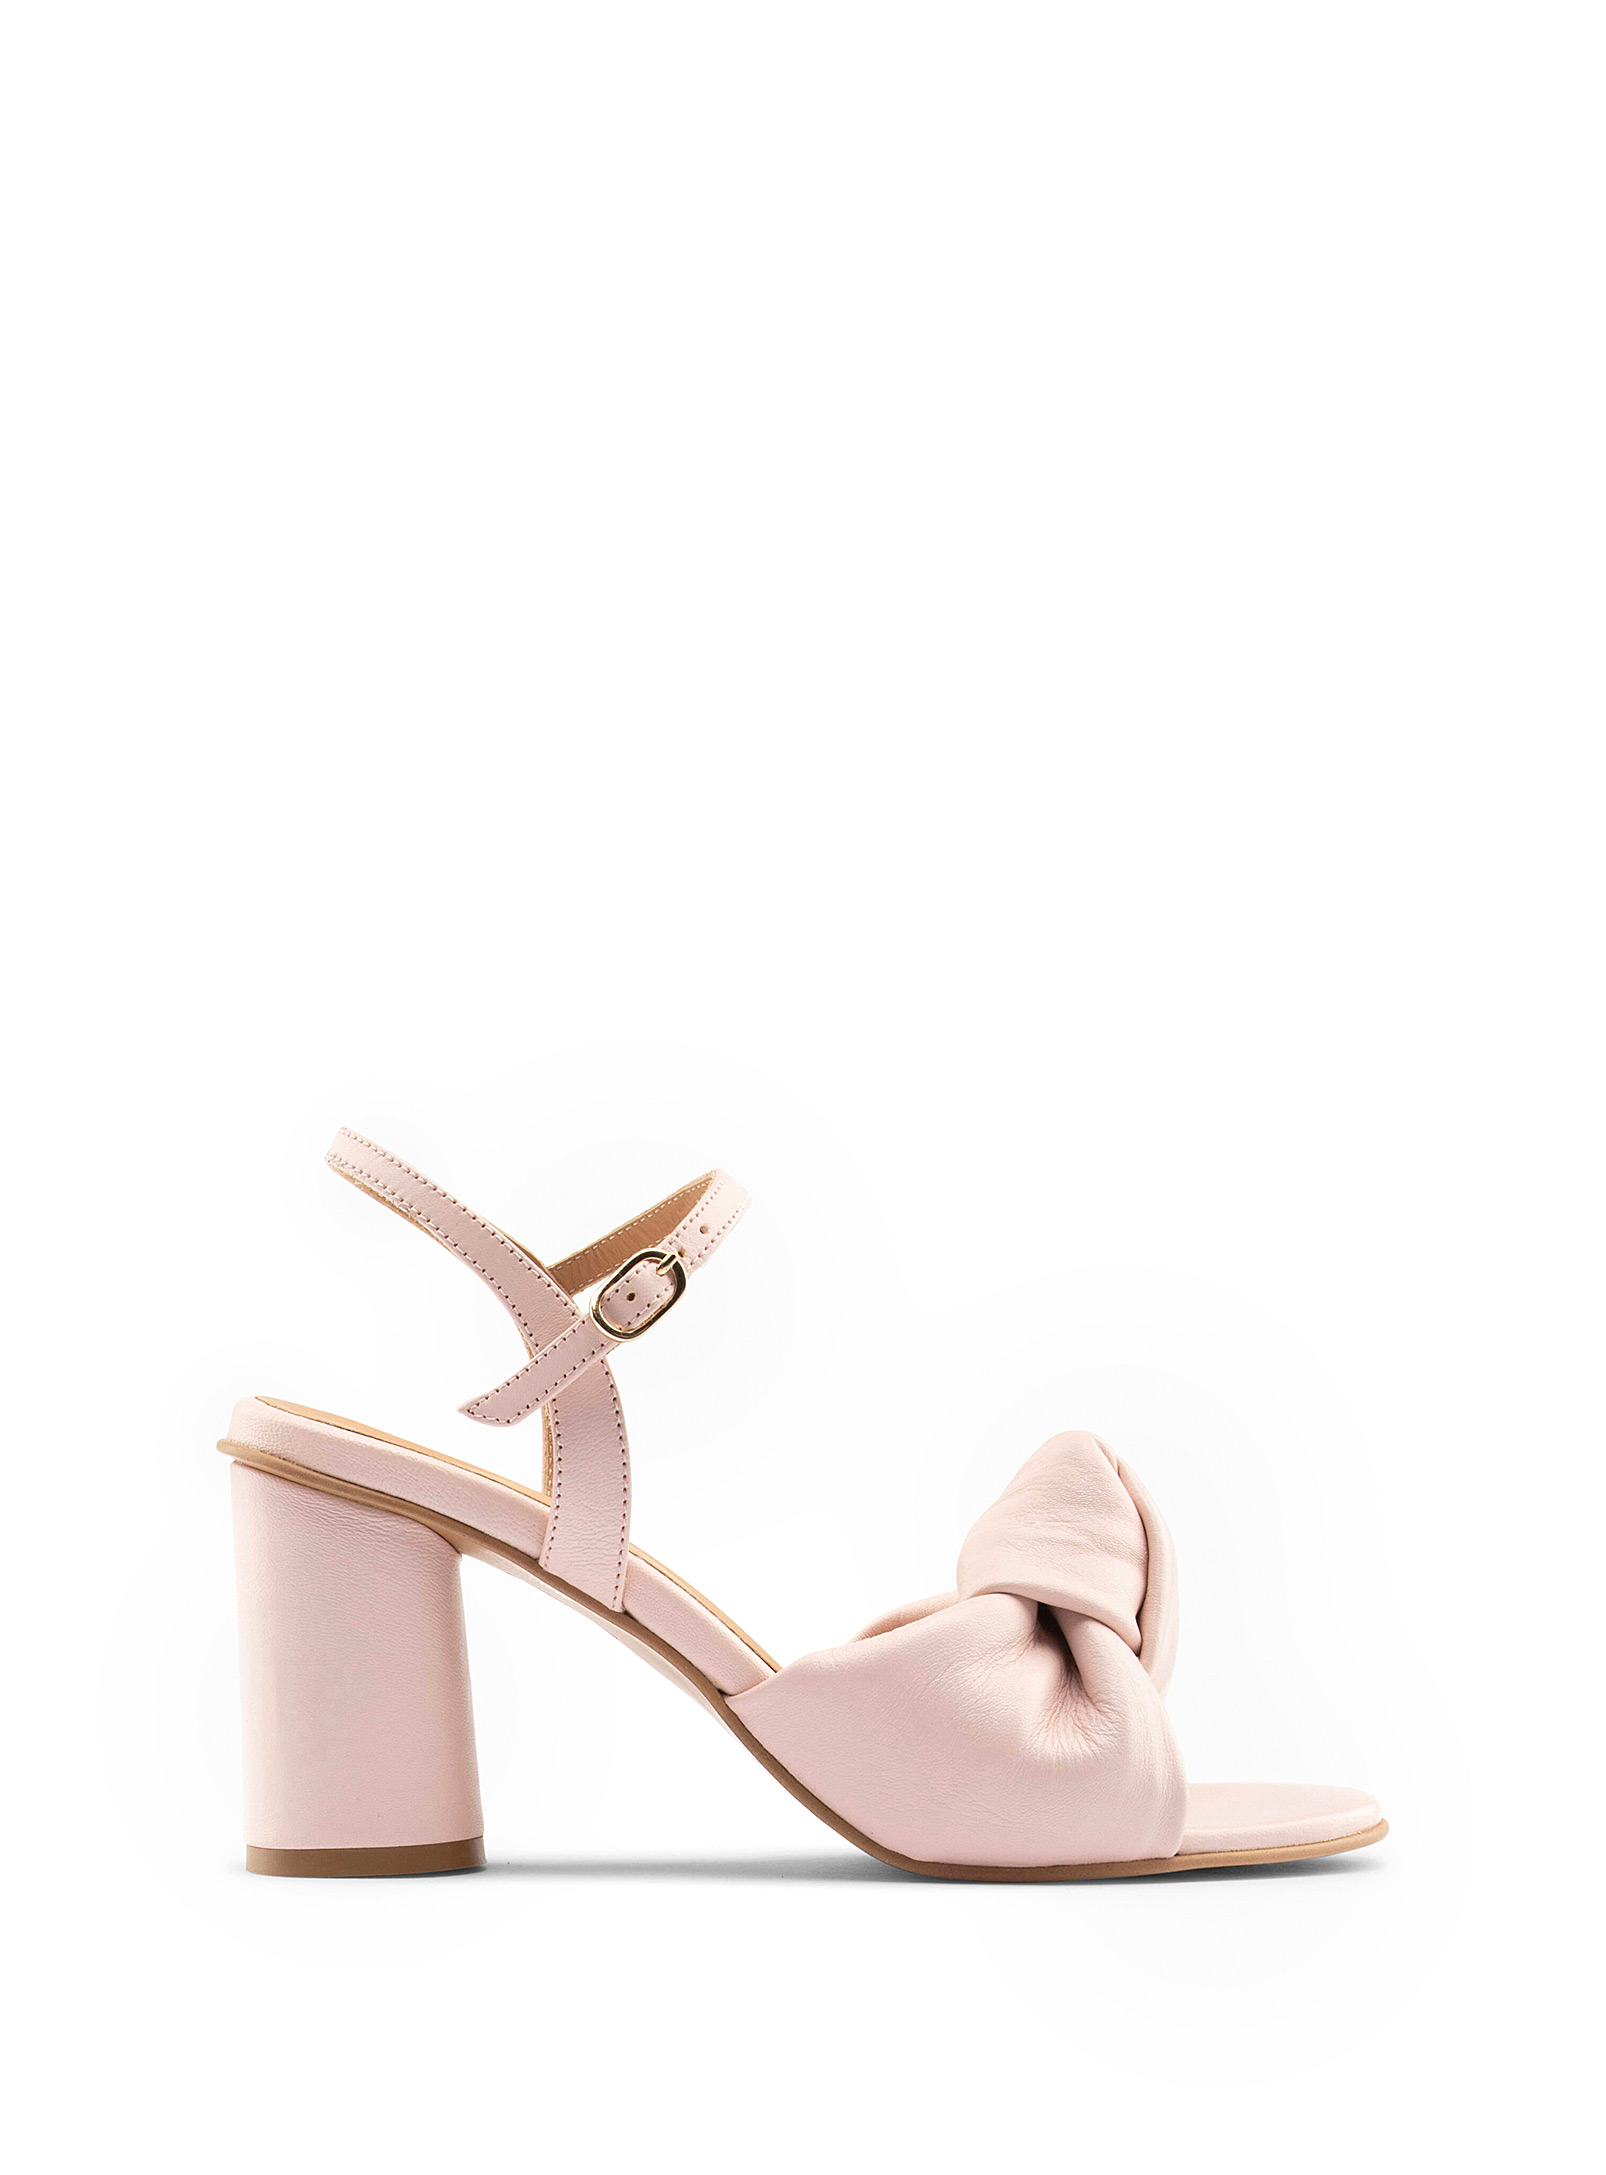 Maguire Noto Block-heel Knotted Sandals Women In Peach